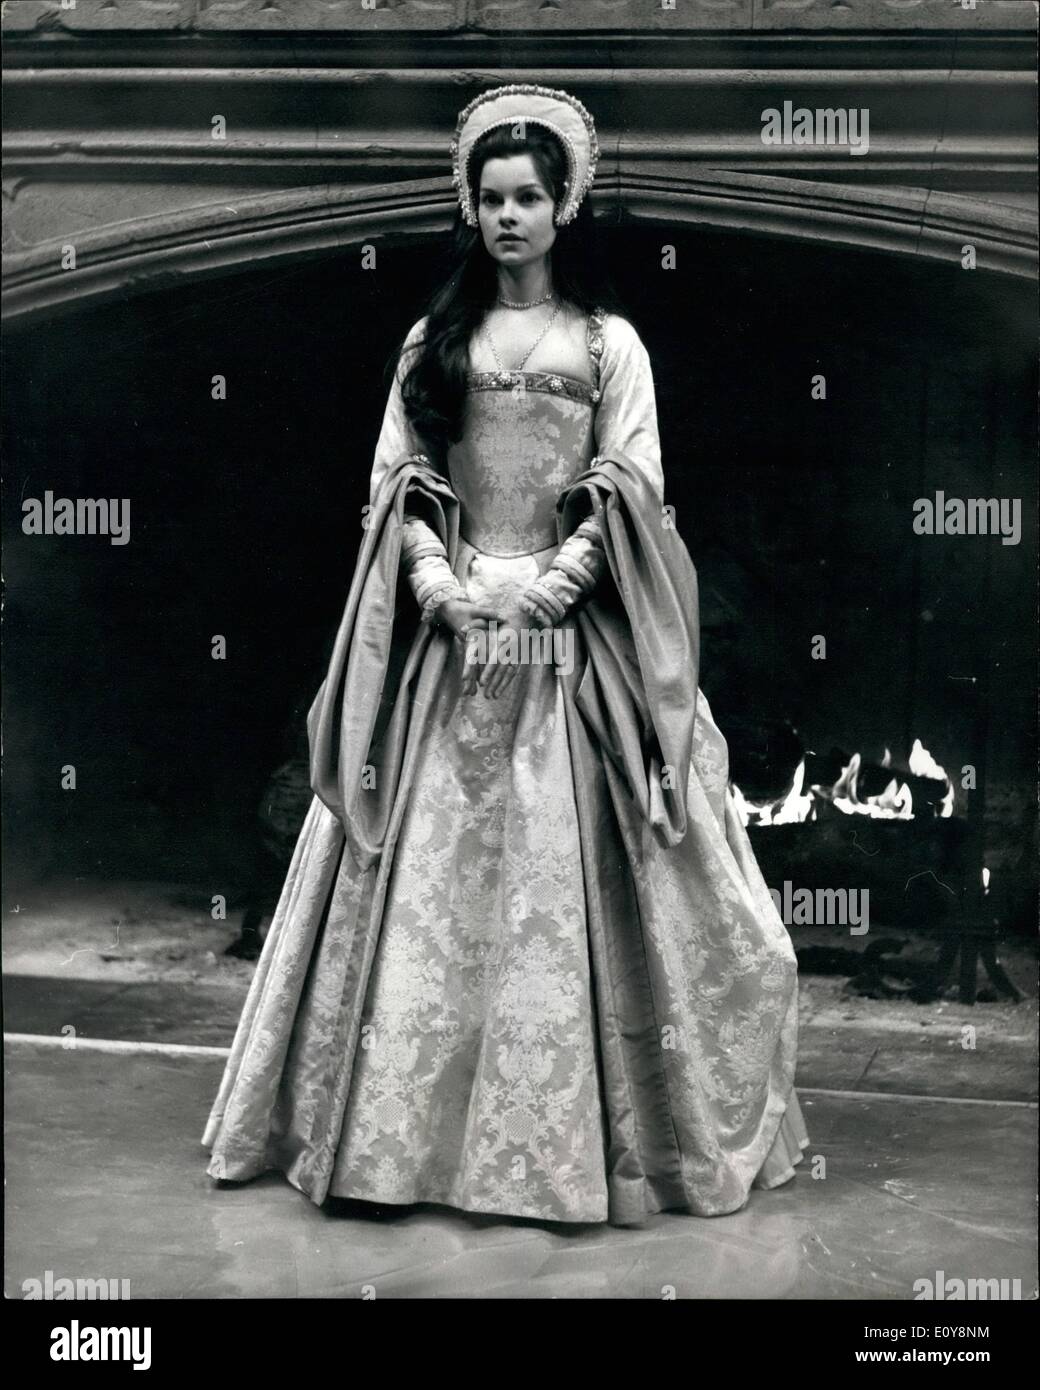 May 05, 1969 - Richard Burton's New Leadin Lady: A reception was held for the stars of the film ''Anne Of The Thousand Days'', at Shepperton Studies yesterday. Starring in the film are Richard Burton and his new leading lady, the French-Canadian actress, Genevieve Bujold. Photo shows Genevieve Bujold in costume at Shepperton yesterday for her role as Anne Boleyn in the film ''Anne Of The Thousand Days''. Richard Burton plays Herny VIII. Stock Photo